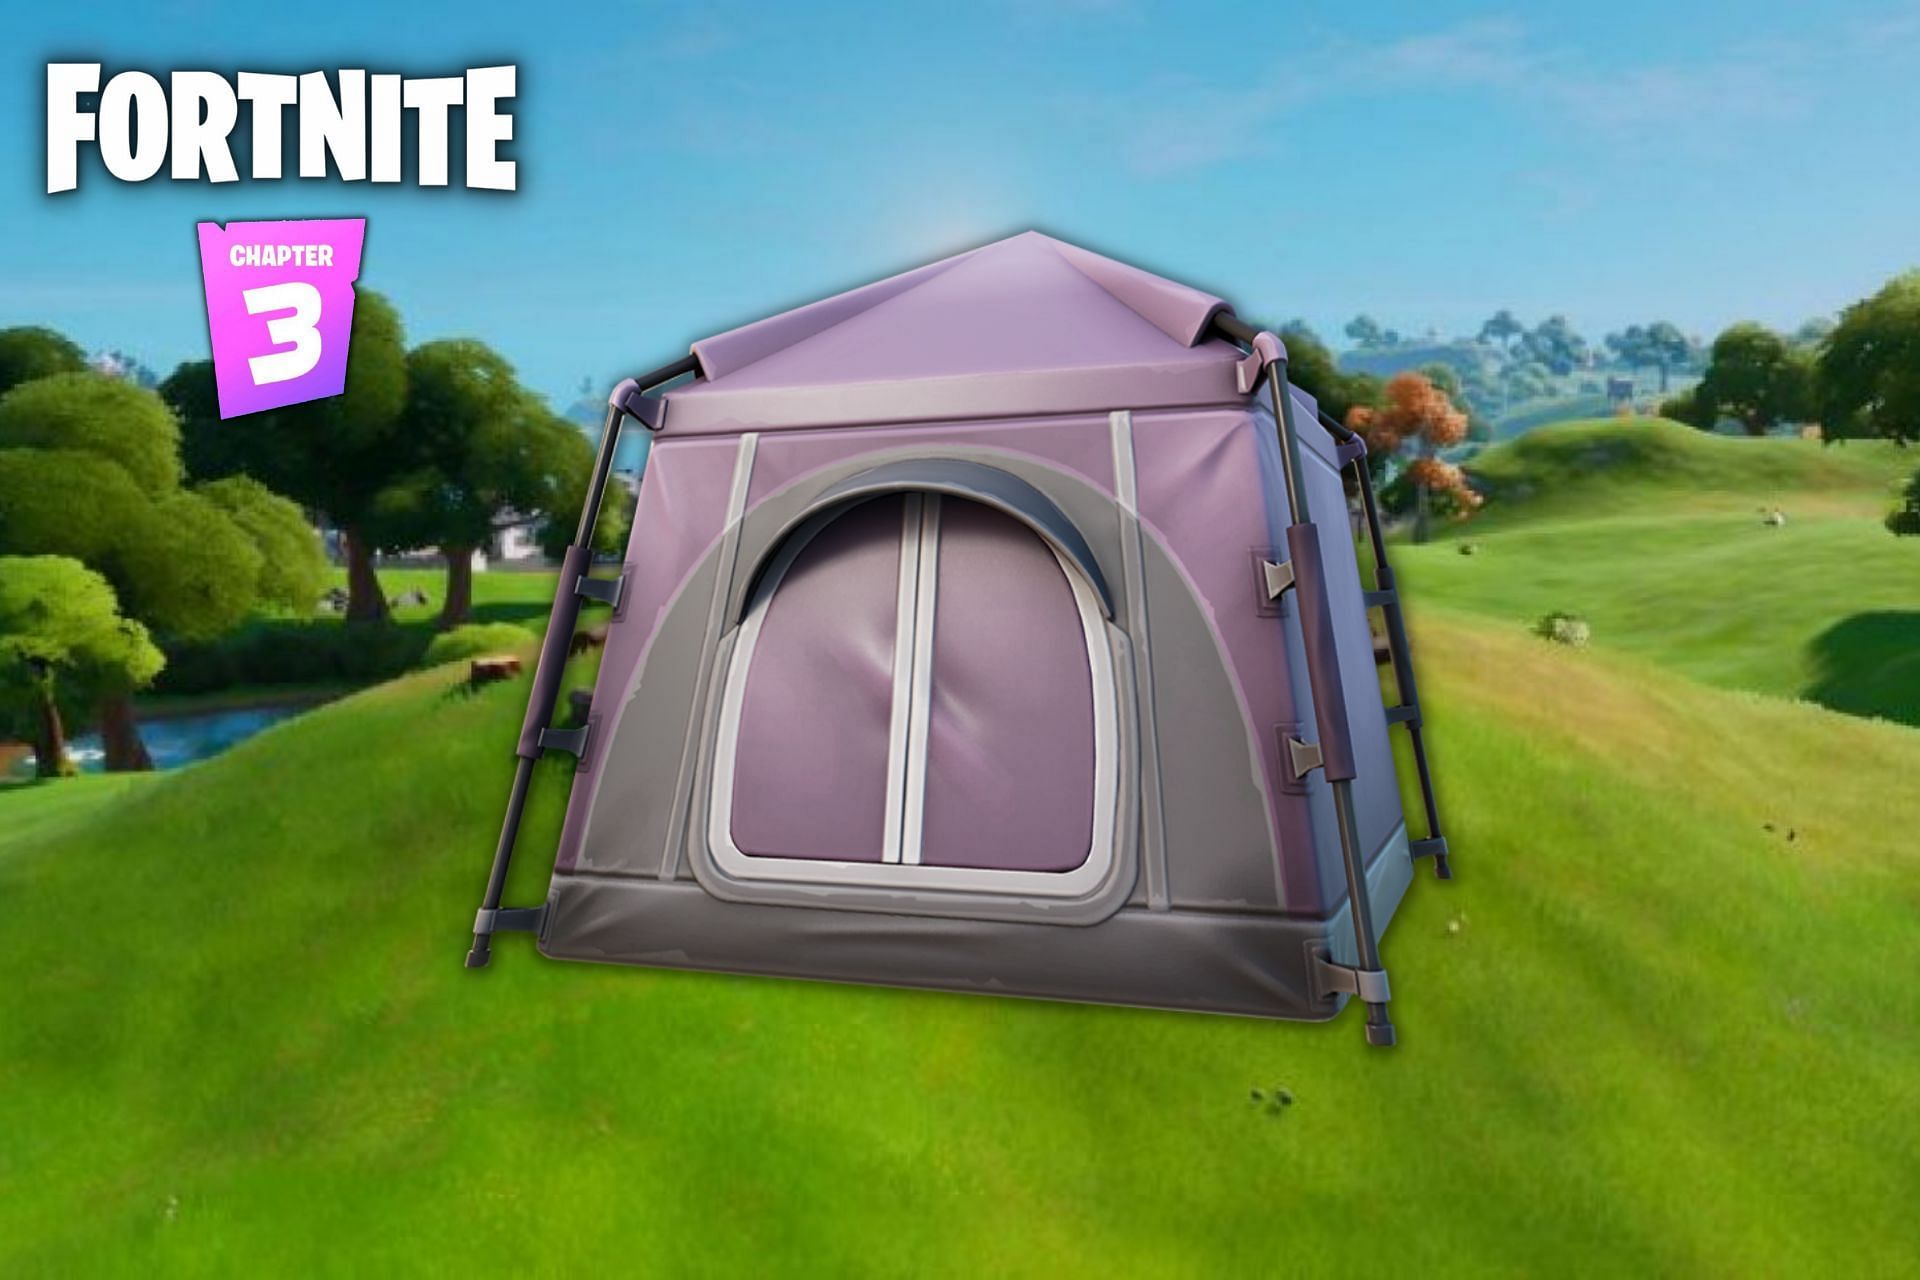 Use this Fortnite Tent Glitch and have added some more fun to the game (Image via Sportskeeda)